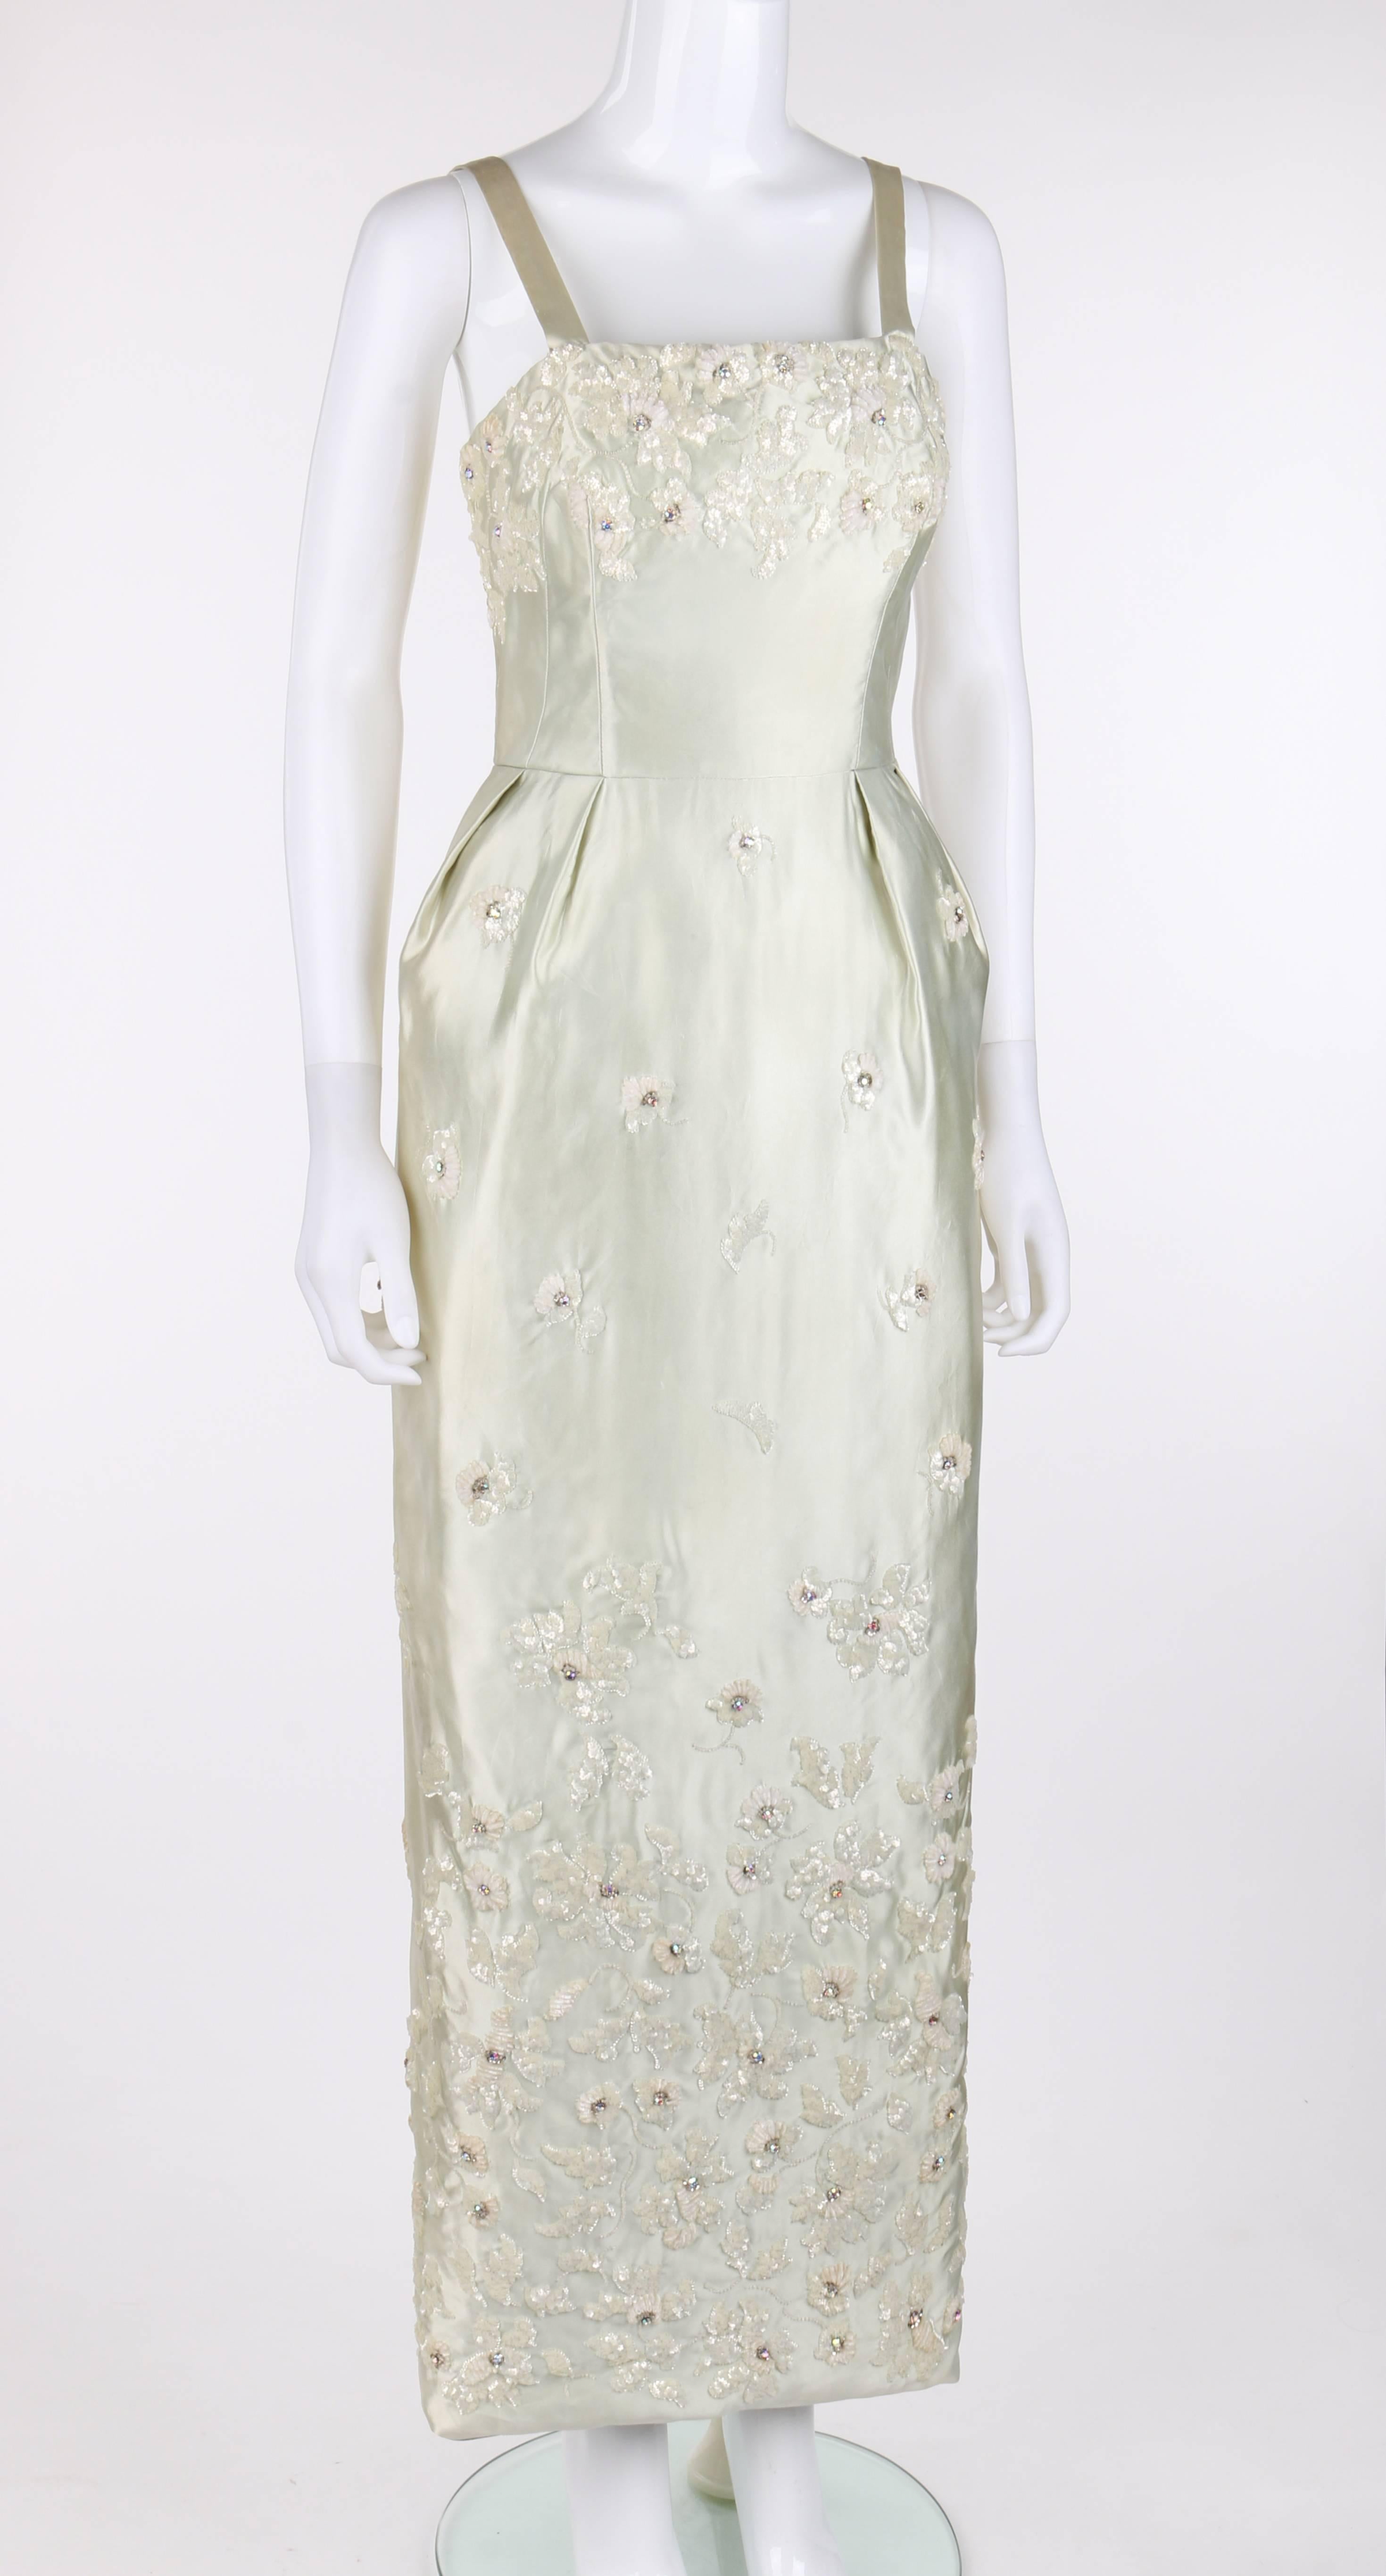 Vintage Givenchy c.1960's Haute Couture numbered pale green silk/satin evening gown. Winter white floral embellishments at top of bodice and descended along skirt to bottom of hem created from thin velvet yarn, floral shaped sequins, tiny seed